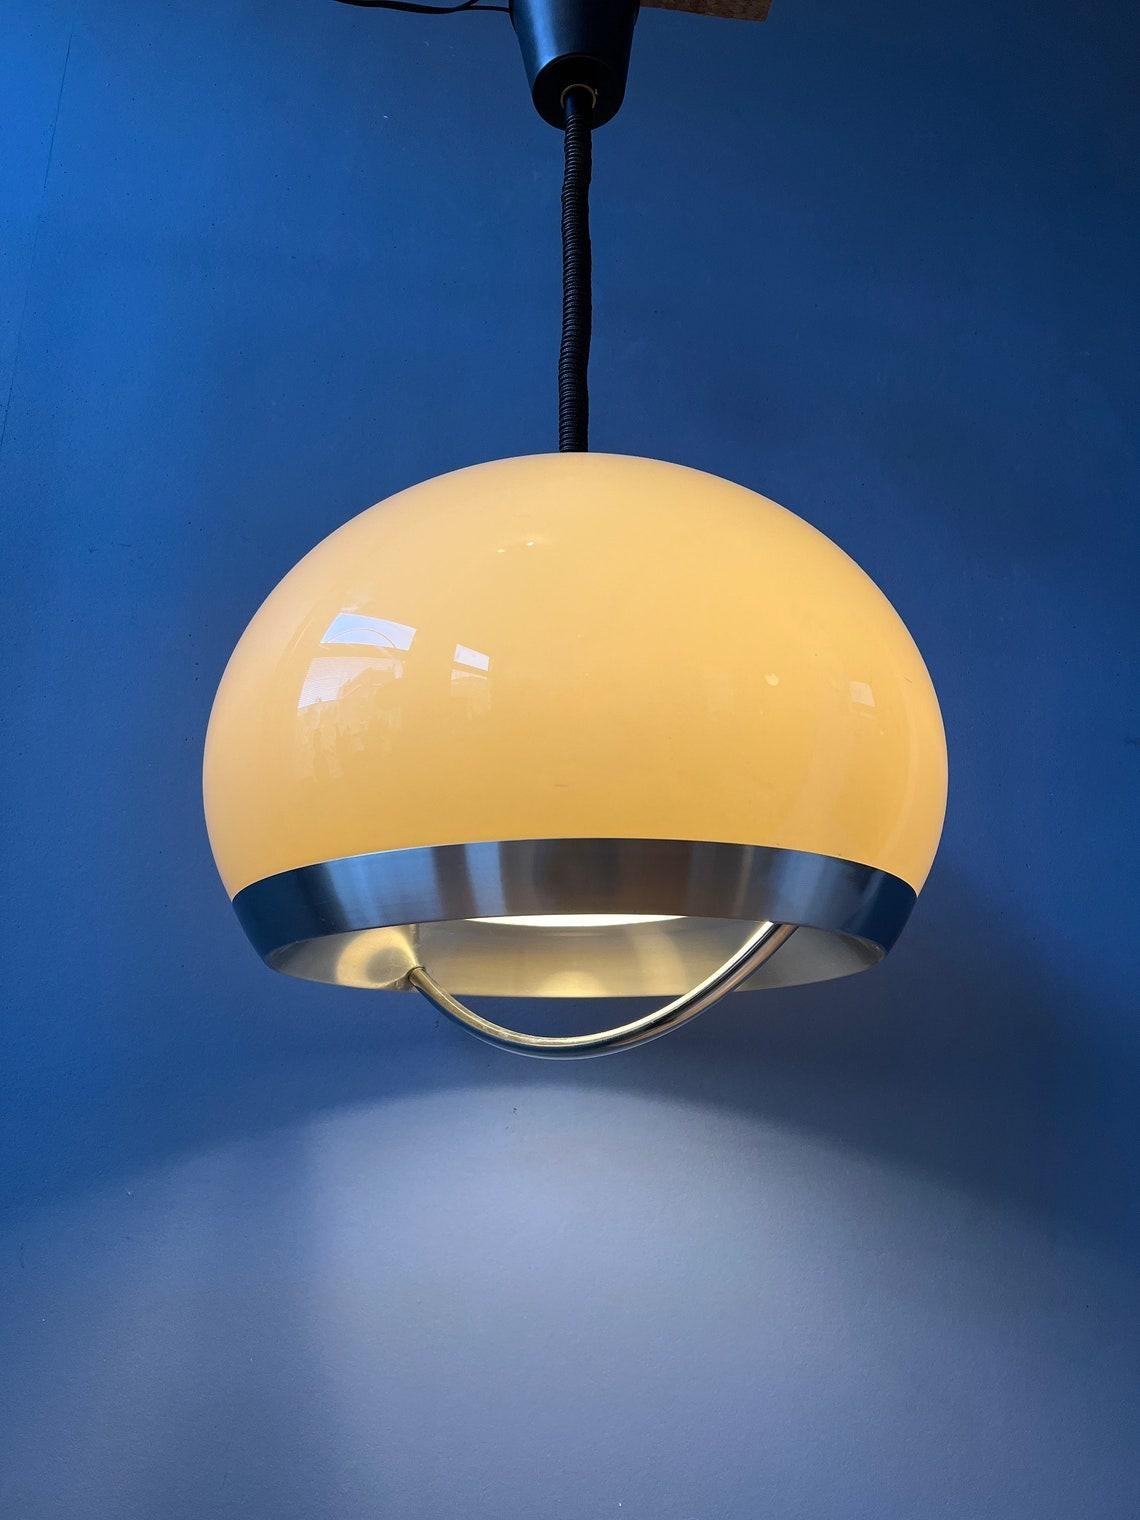 Beautiful space age pendant by Dijkstra in beige/mocca colour and aluminium/metal frame. The shade produces a magnificent glow, reflecting nicely on the chrome arc underneath the shade. The lamps requires an E27 (standard) lightbulb.

Additional